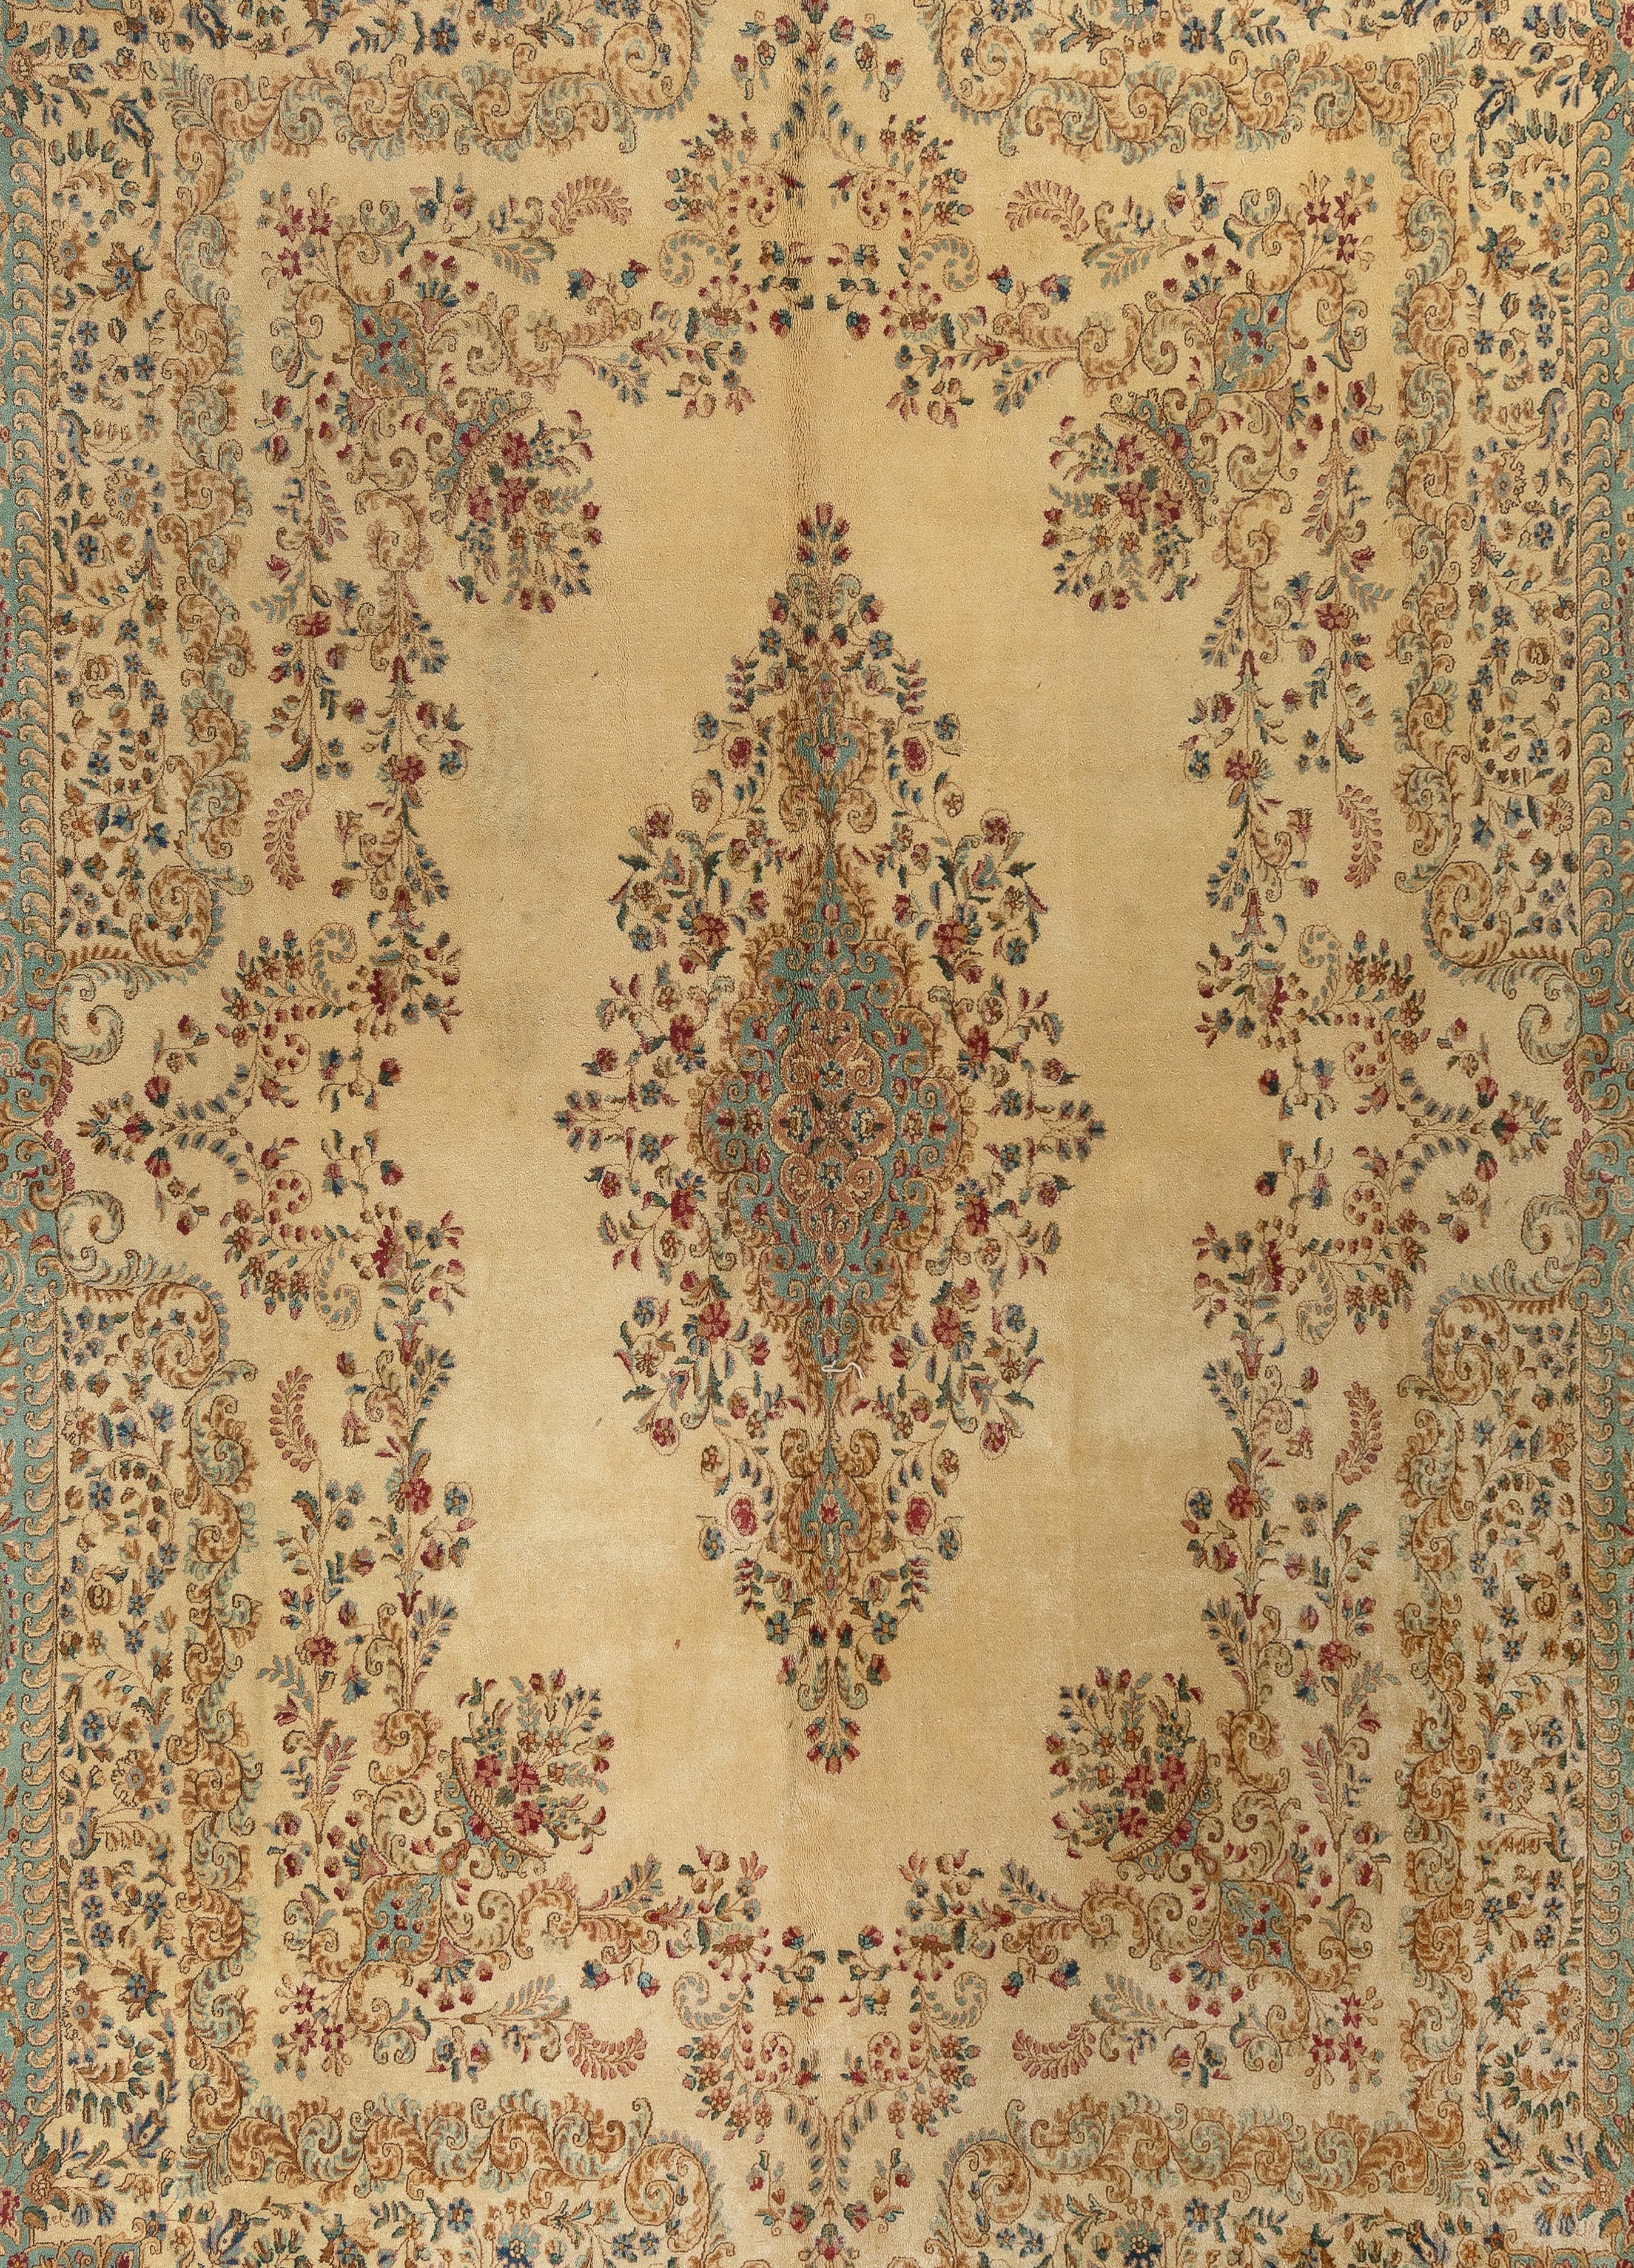 This exquisite vintage Persian Kerman rug has a very fine texture of soft lamb's wool on a tightly woven cotton foundation. With its incredibly well drawn details, the rug is a splendid piece to behold in delight. It features delicate flowering